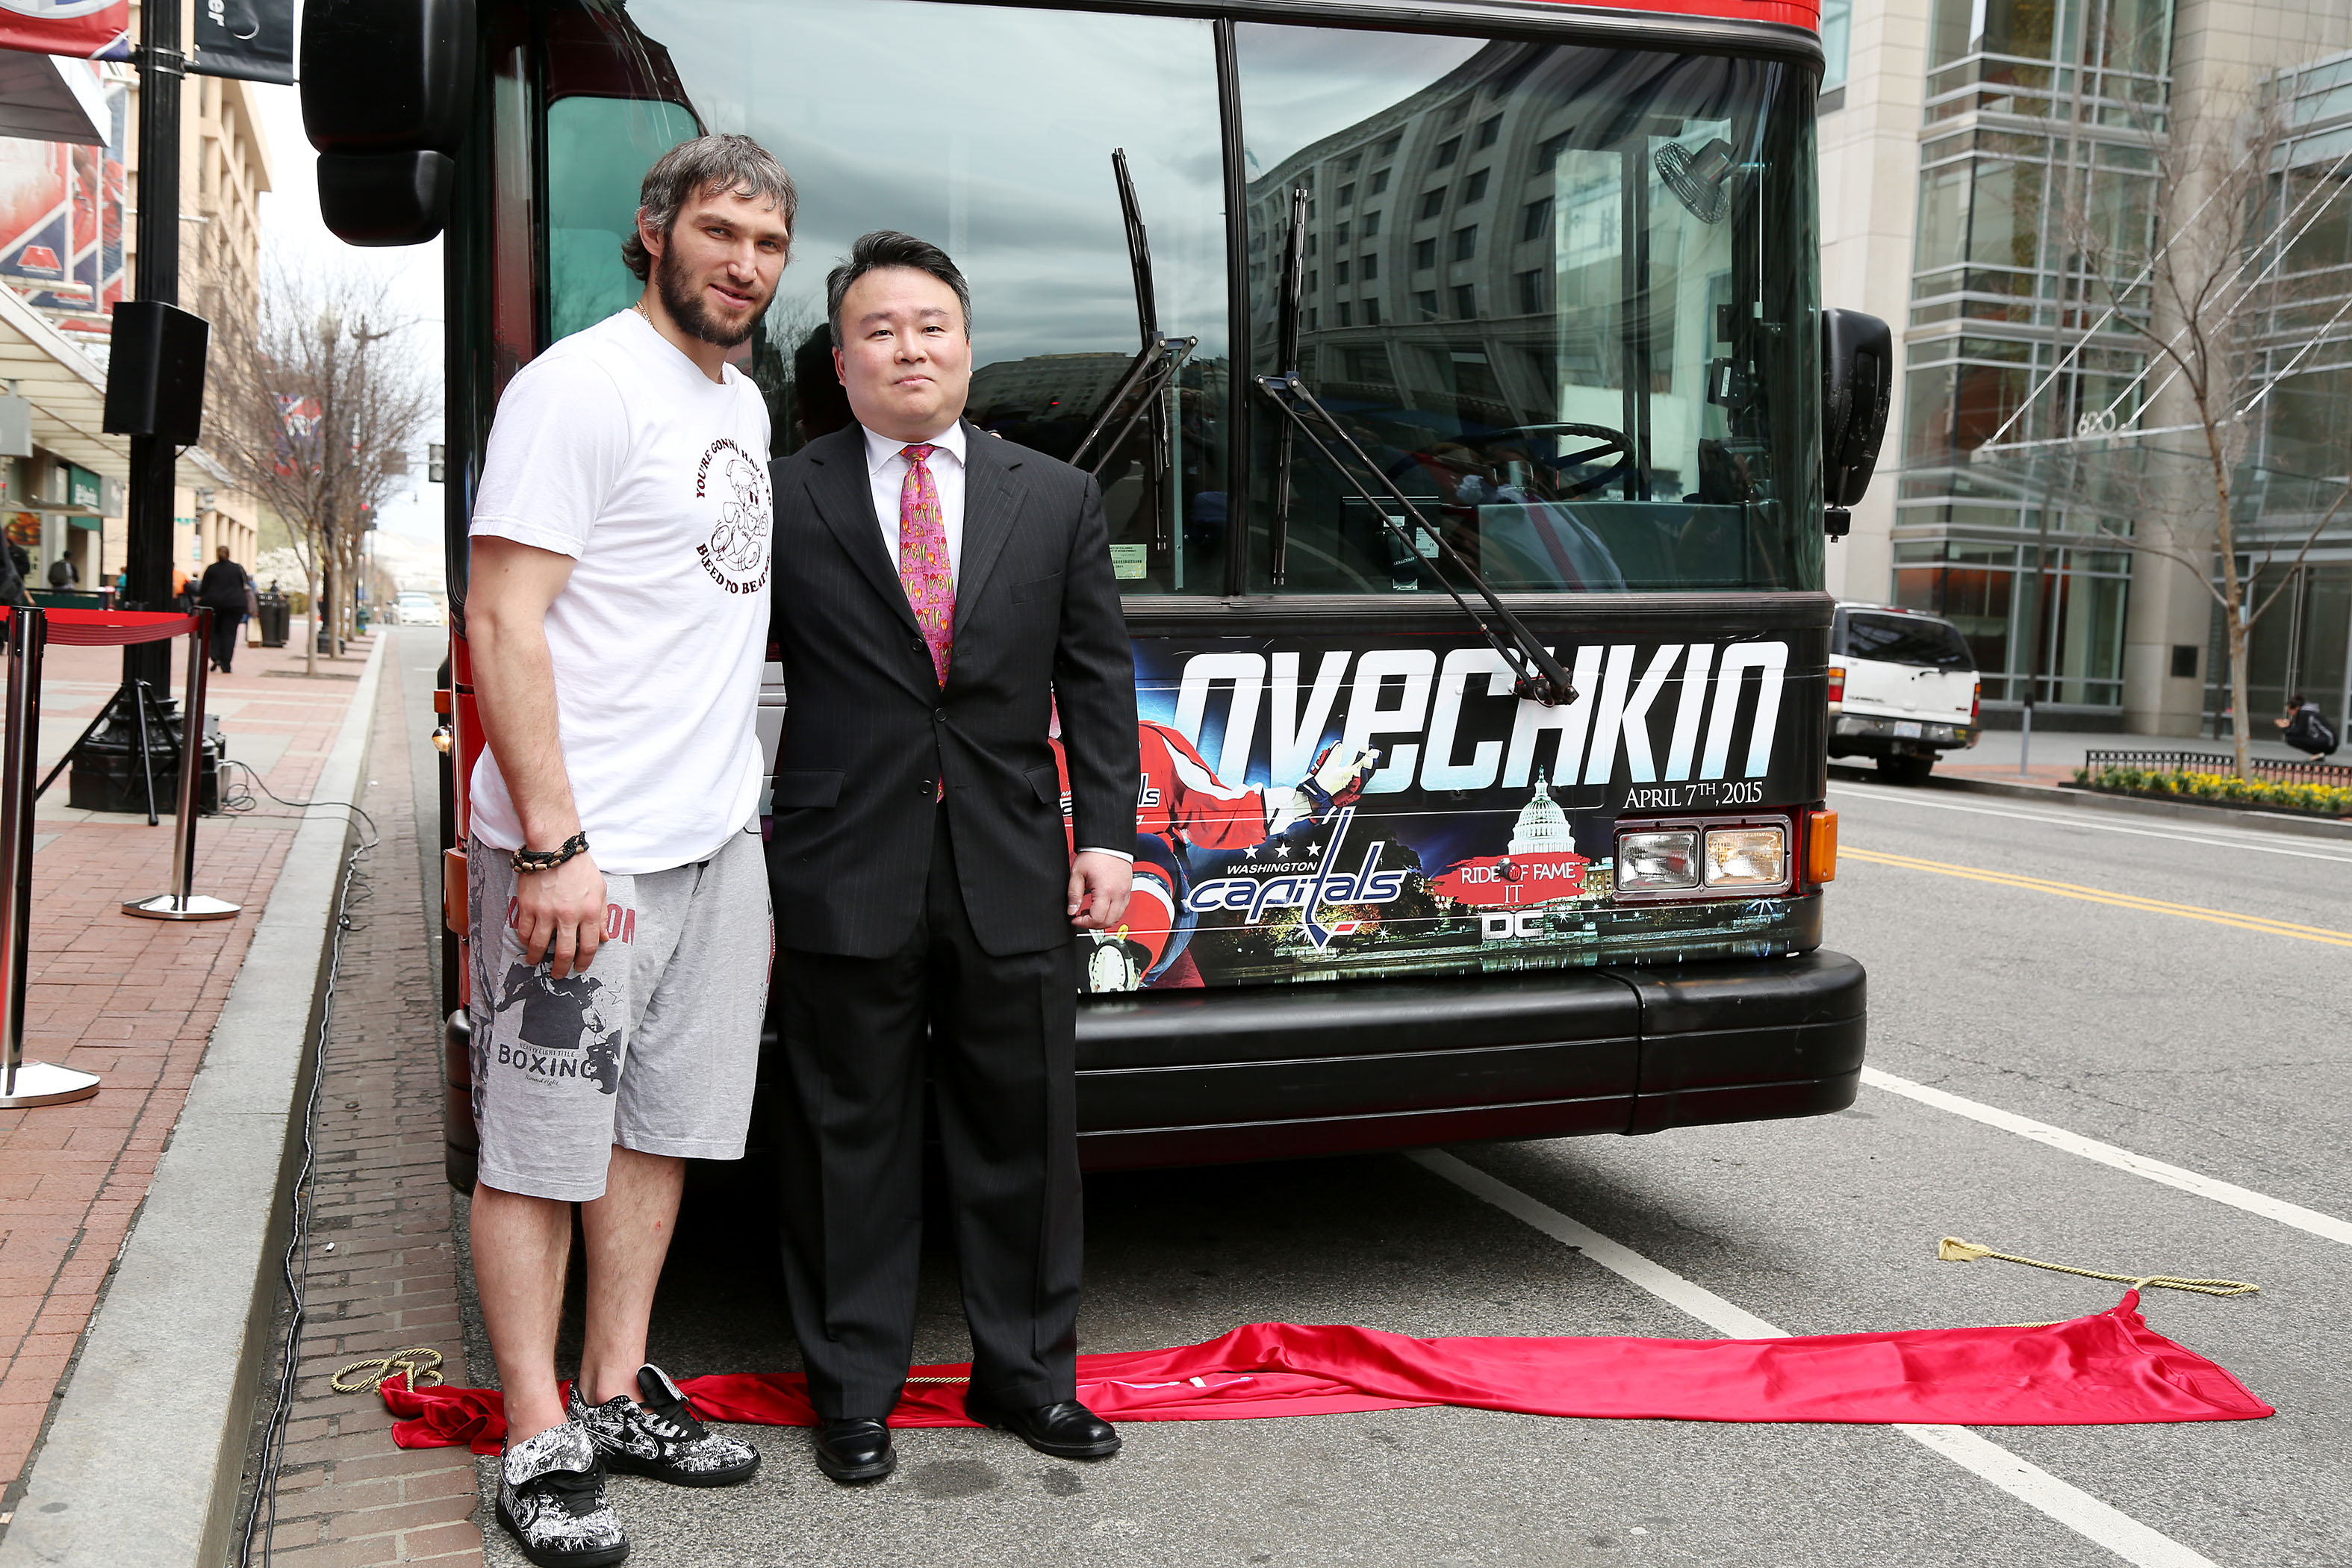 David W. Chien poses with Ride of Fame DC honoree Alexander Ovechkin (April 7th, 2015).